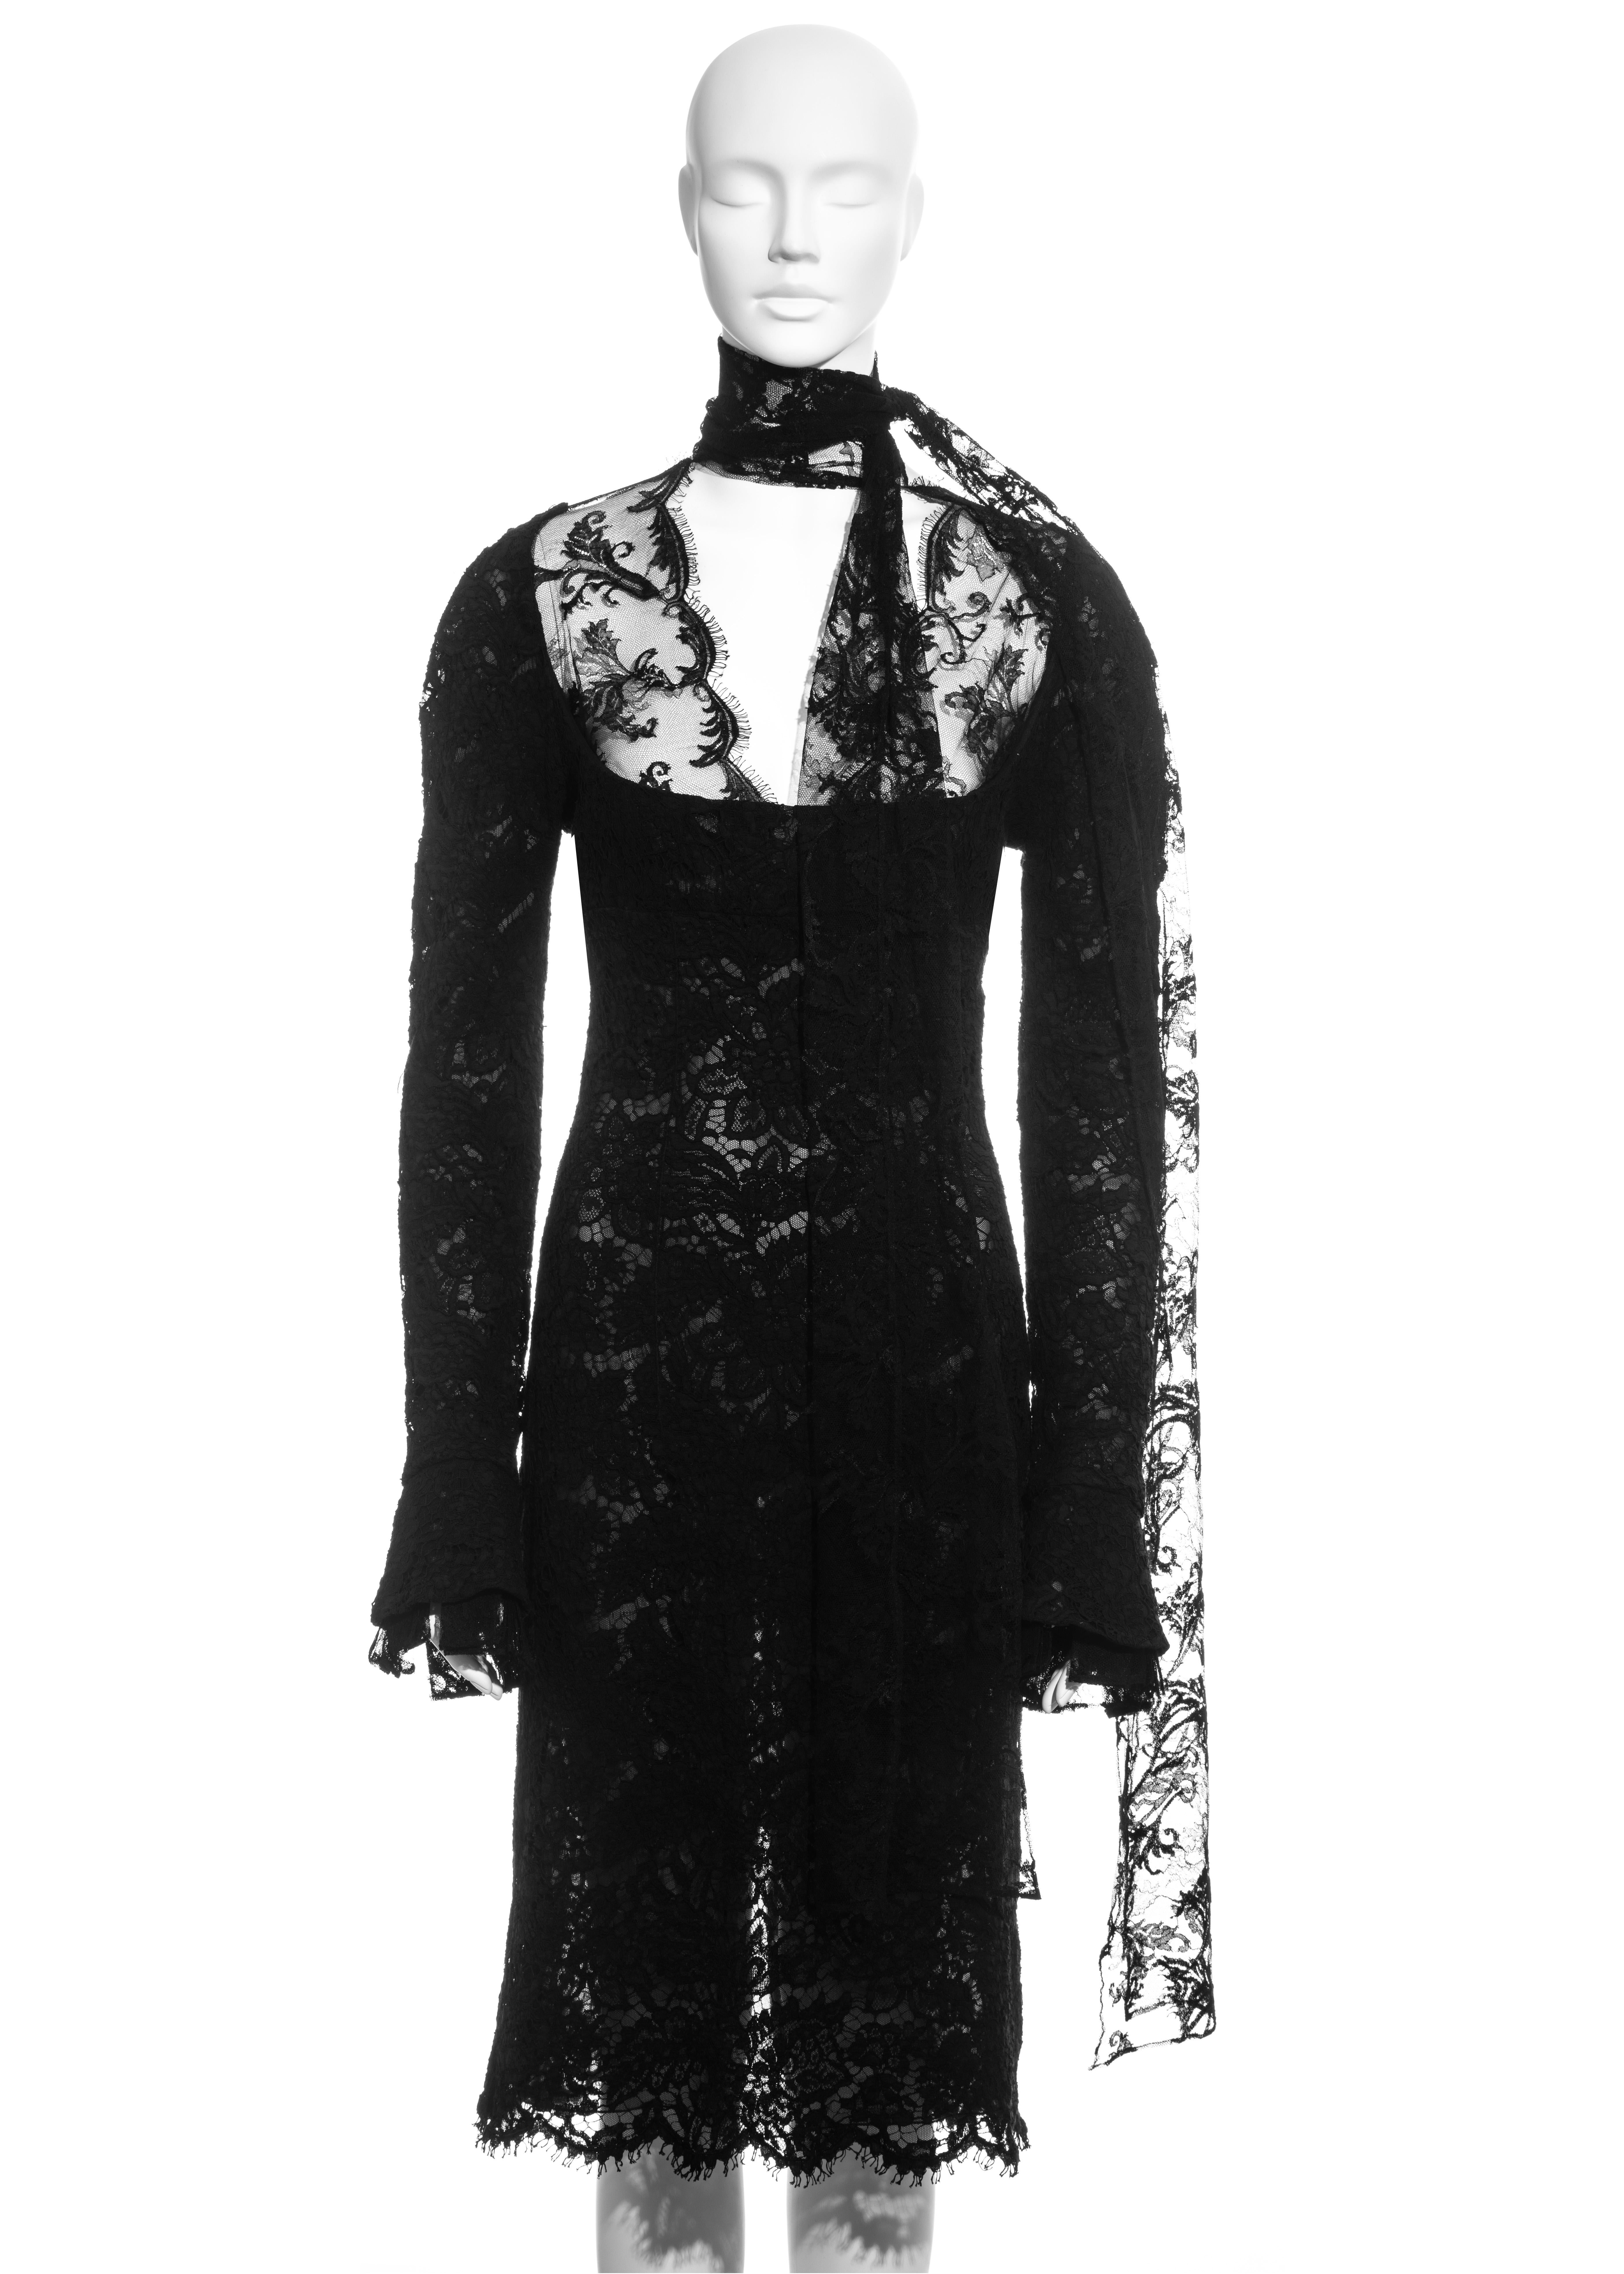 ▪ Black lace long-sleeve evening dress
▪ Silk organza lining 
▪ Long scarf neck fastening 
▪ Dropped pleated cuffs
▪ Bust 34